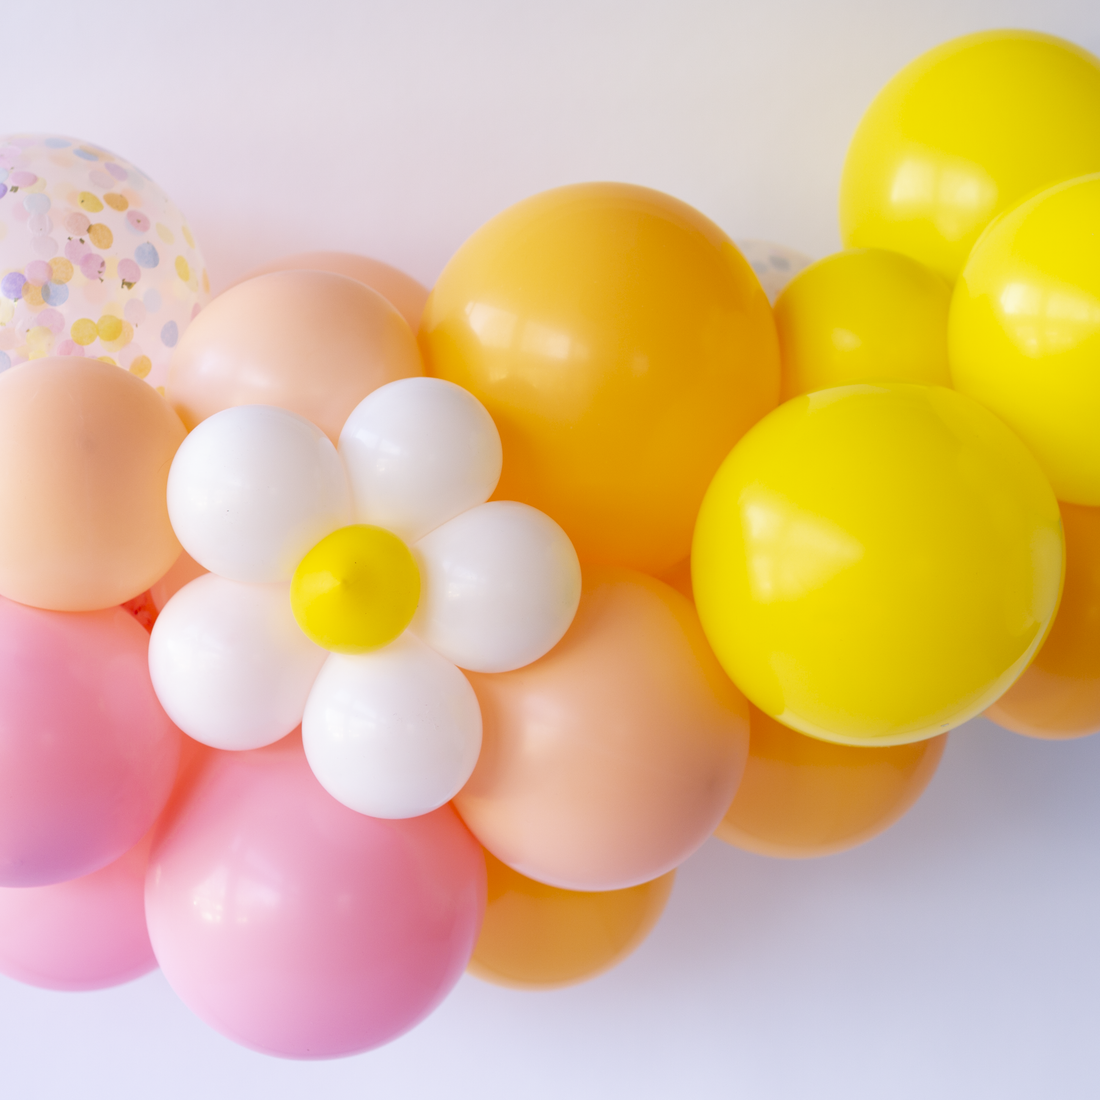 Small Daisy Flower Balloon (18 Inches) from Ellie's Party Supply